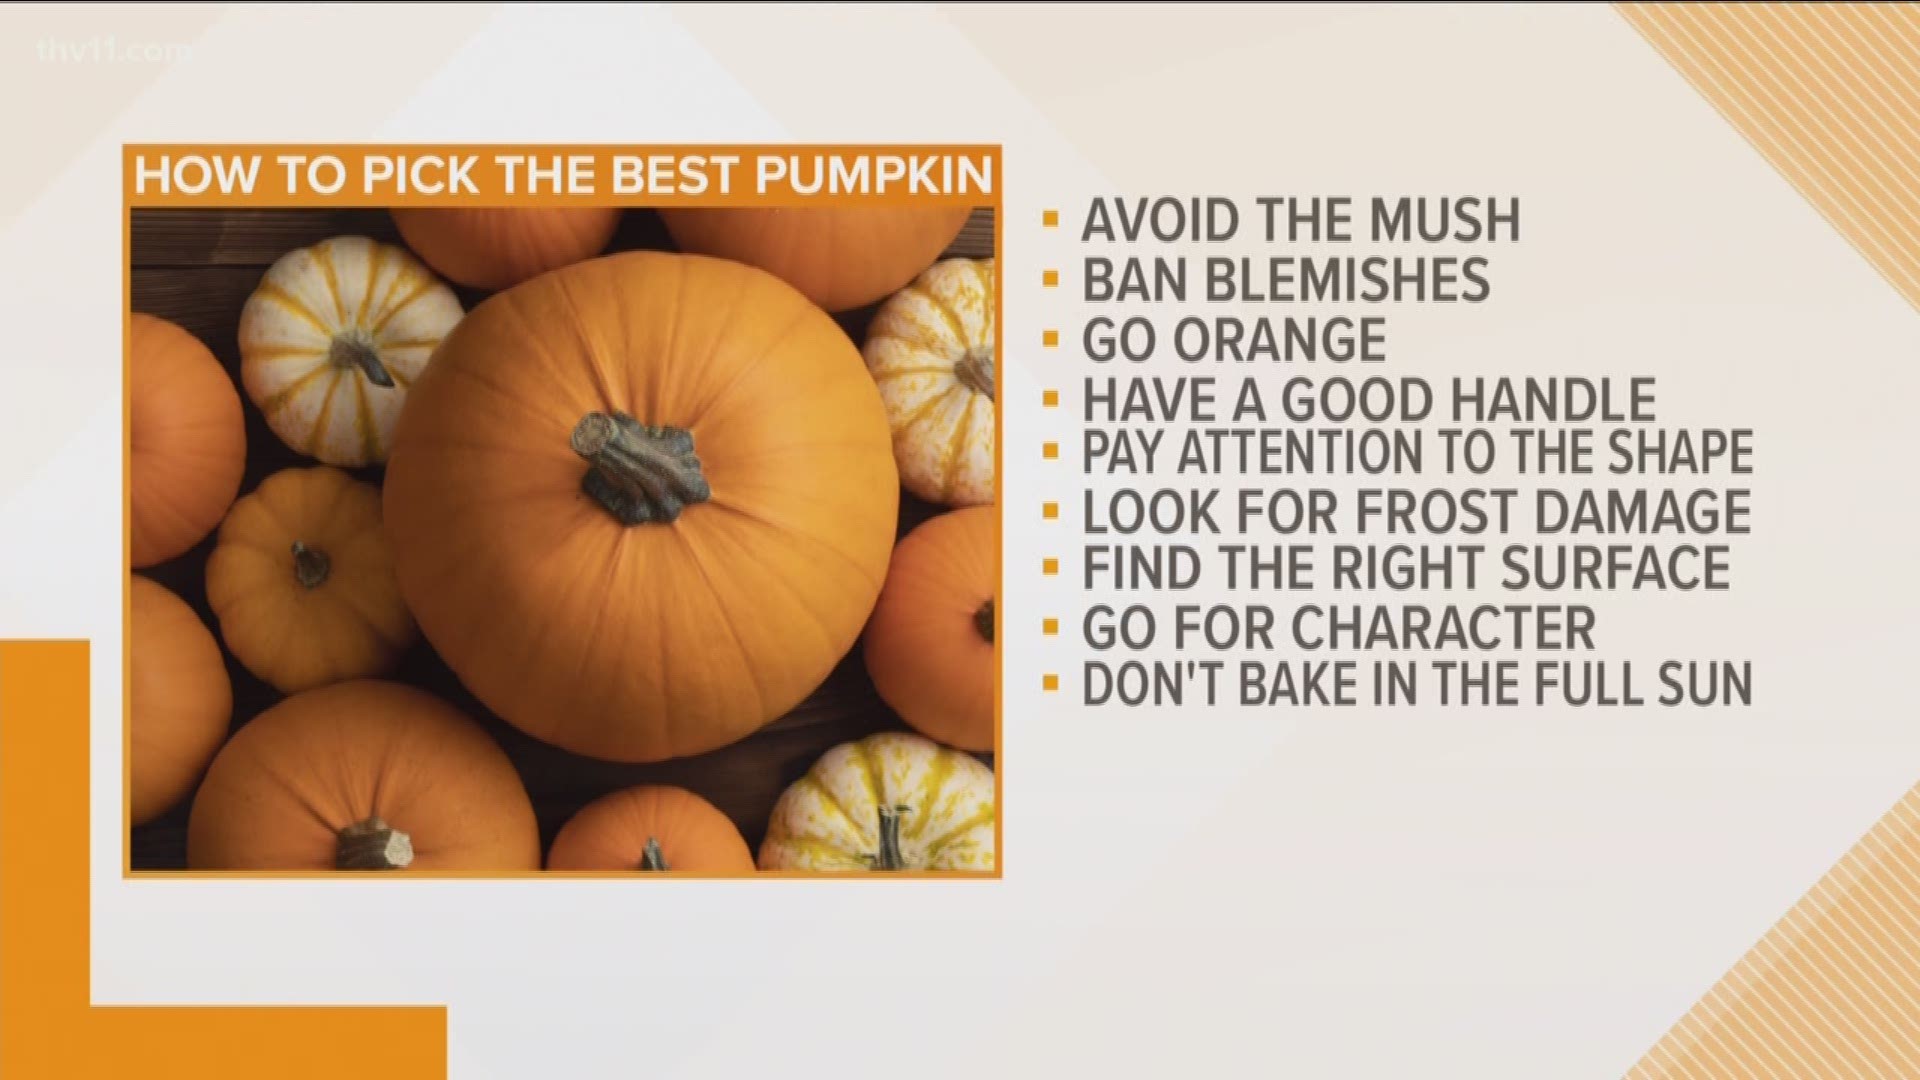 Pumpkins are here and there are some tips you may want to know when choosing the perfect pumpkin. We've got Chris H. Olsen here with us and he's going to share some of those tips.